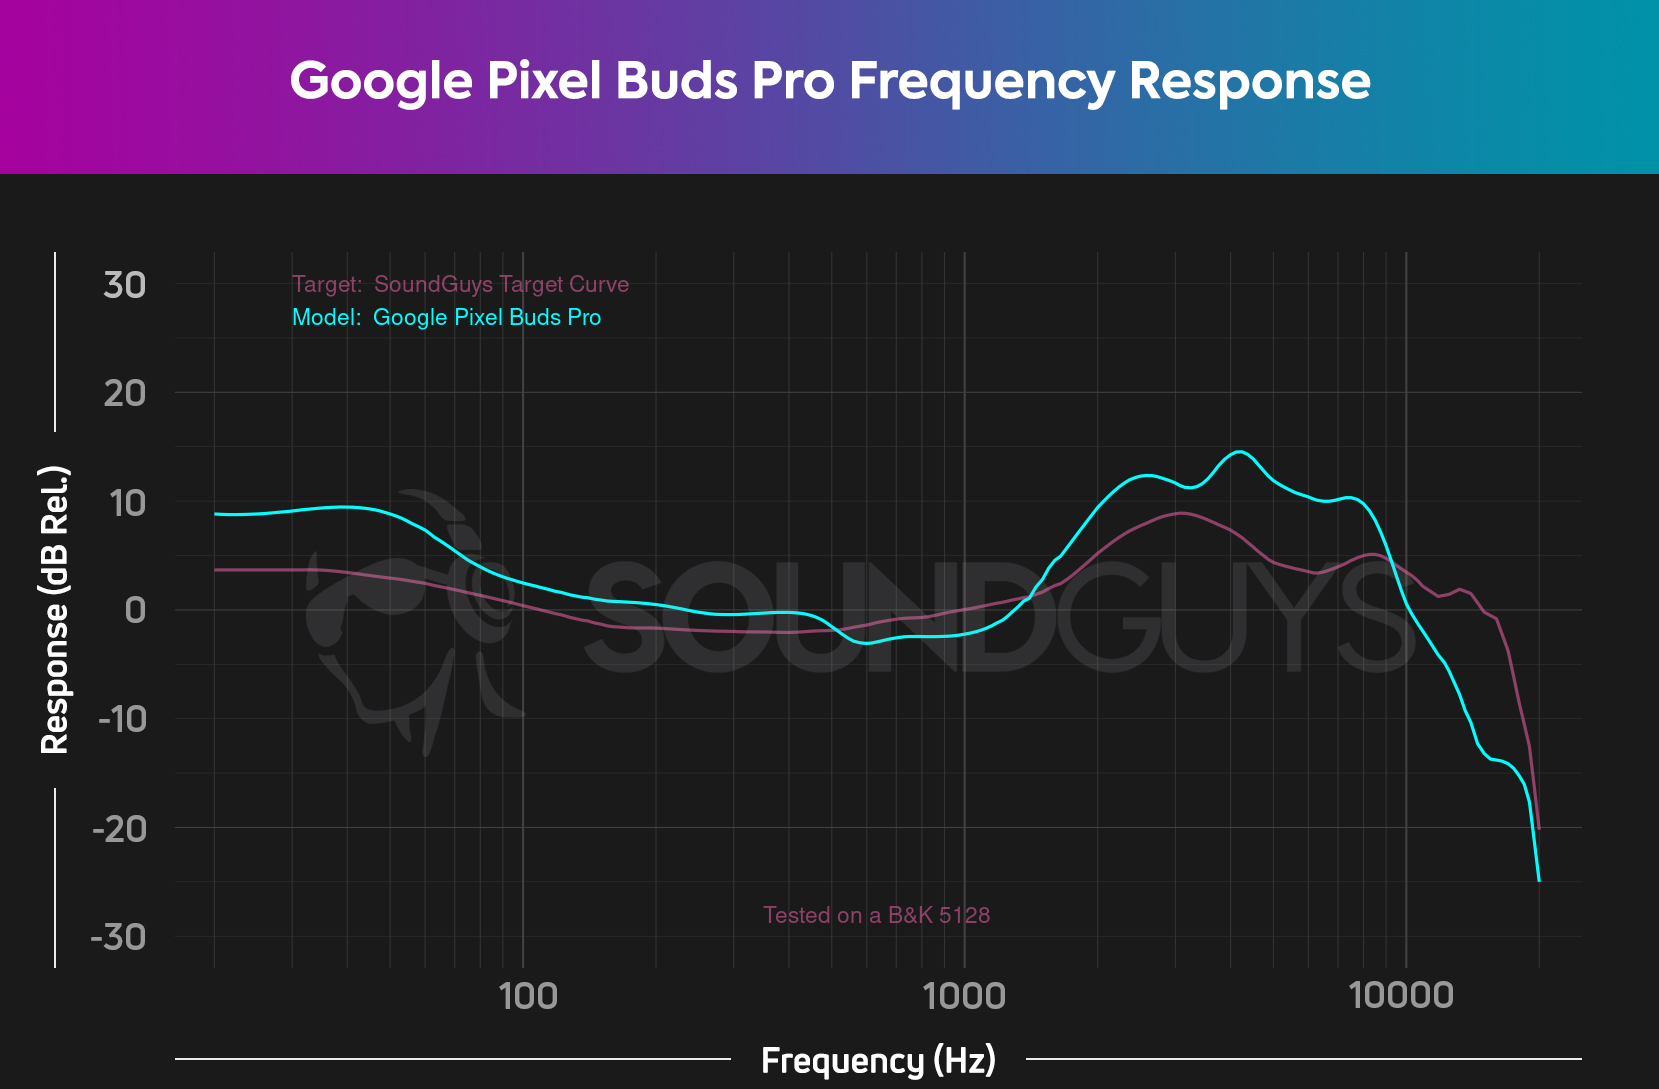 Pixel Buds Pro have to avoid Google's past problems